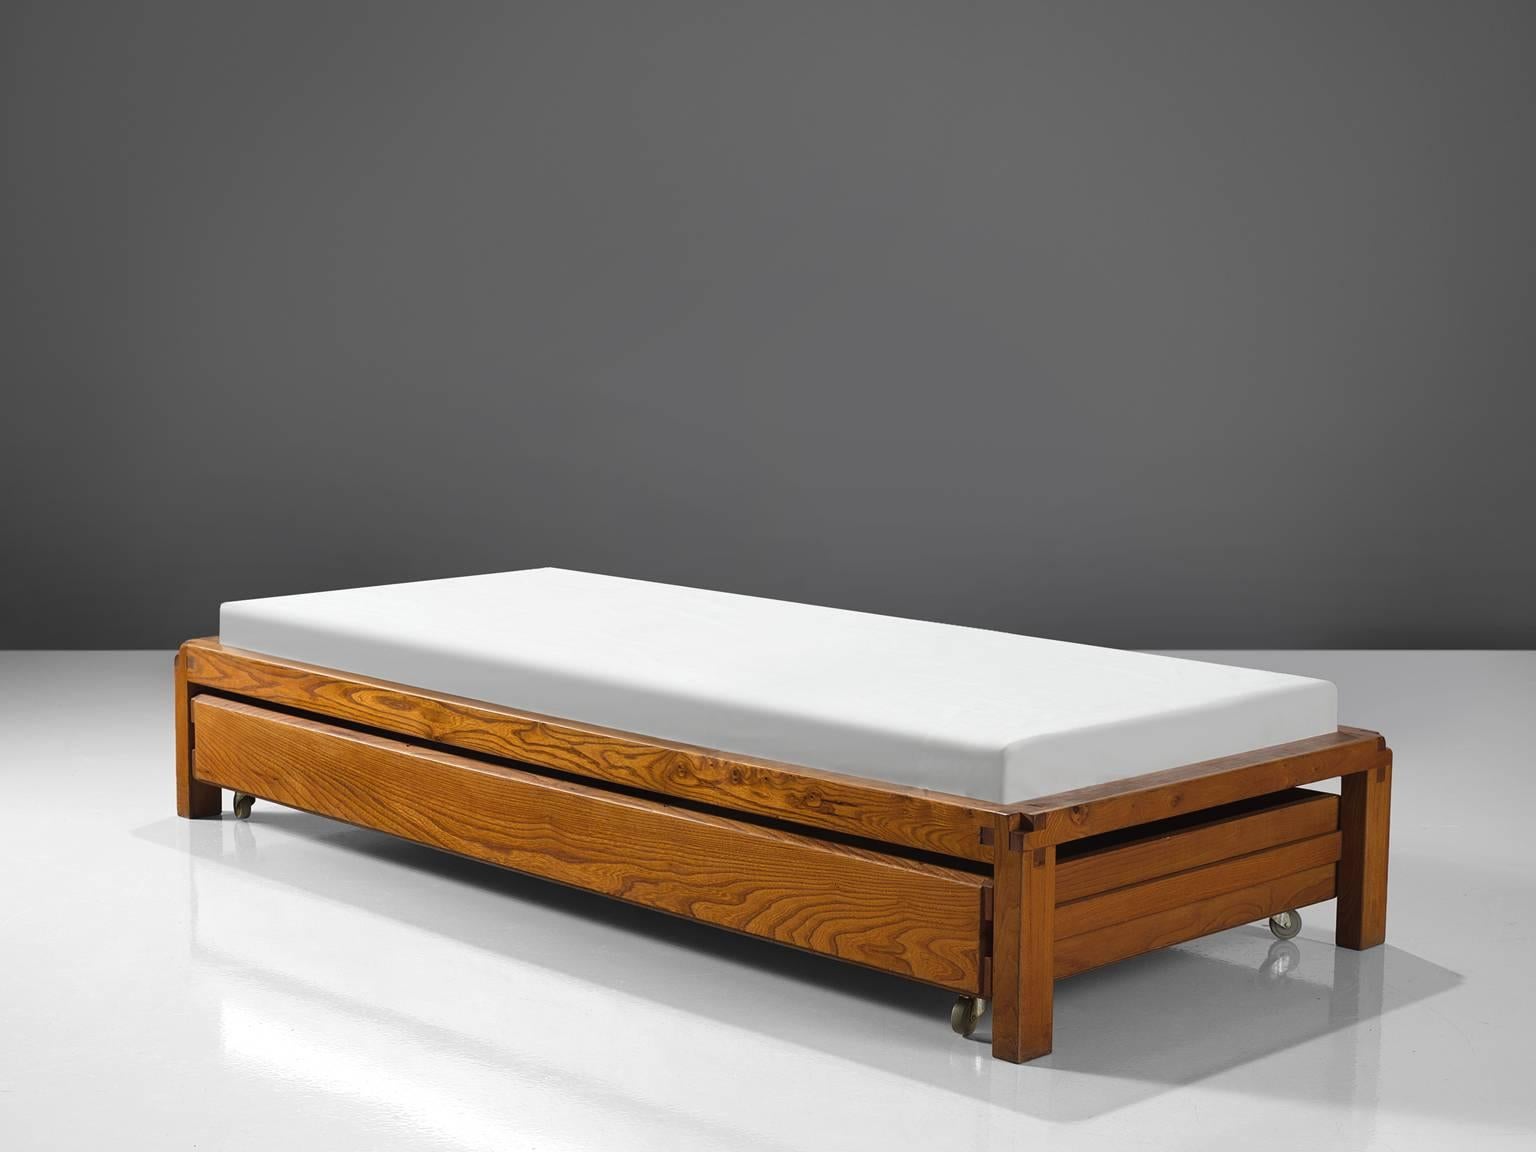 Pierre Chapo, bed with drawer, model L03, France, circa 1965. 

This bed is designed by Pierre Chapo in 1965. The bed has storage underneath in the shape of a large drawers with wheels. The bed features the hand-crafted joints that the woodworker